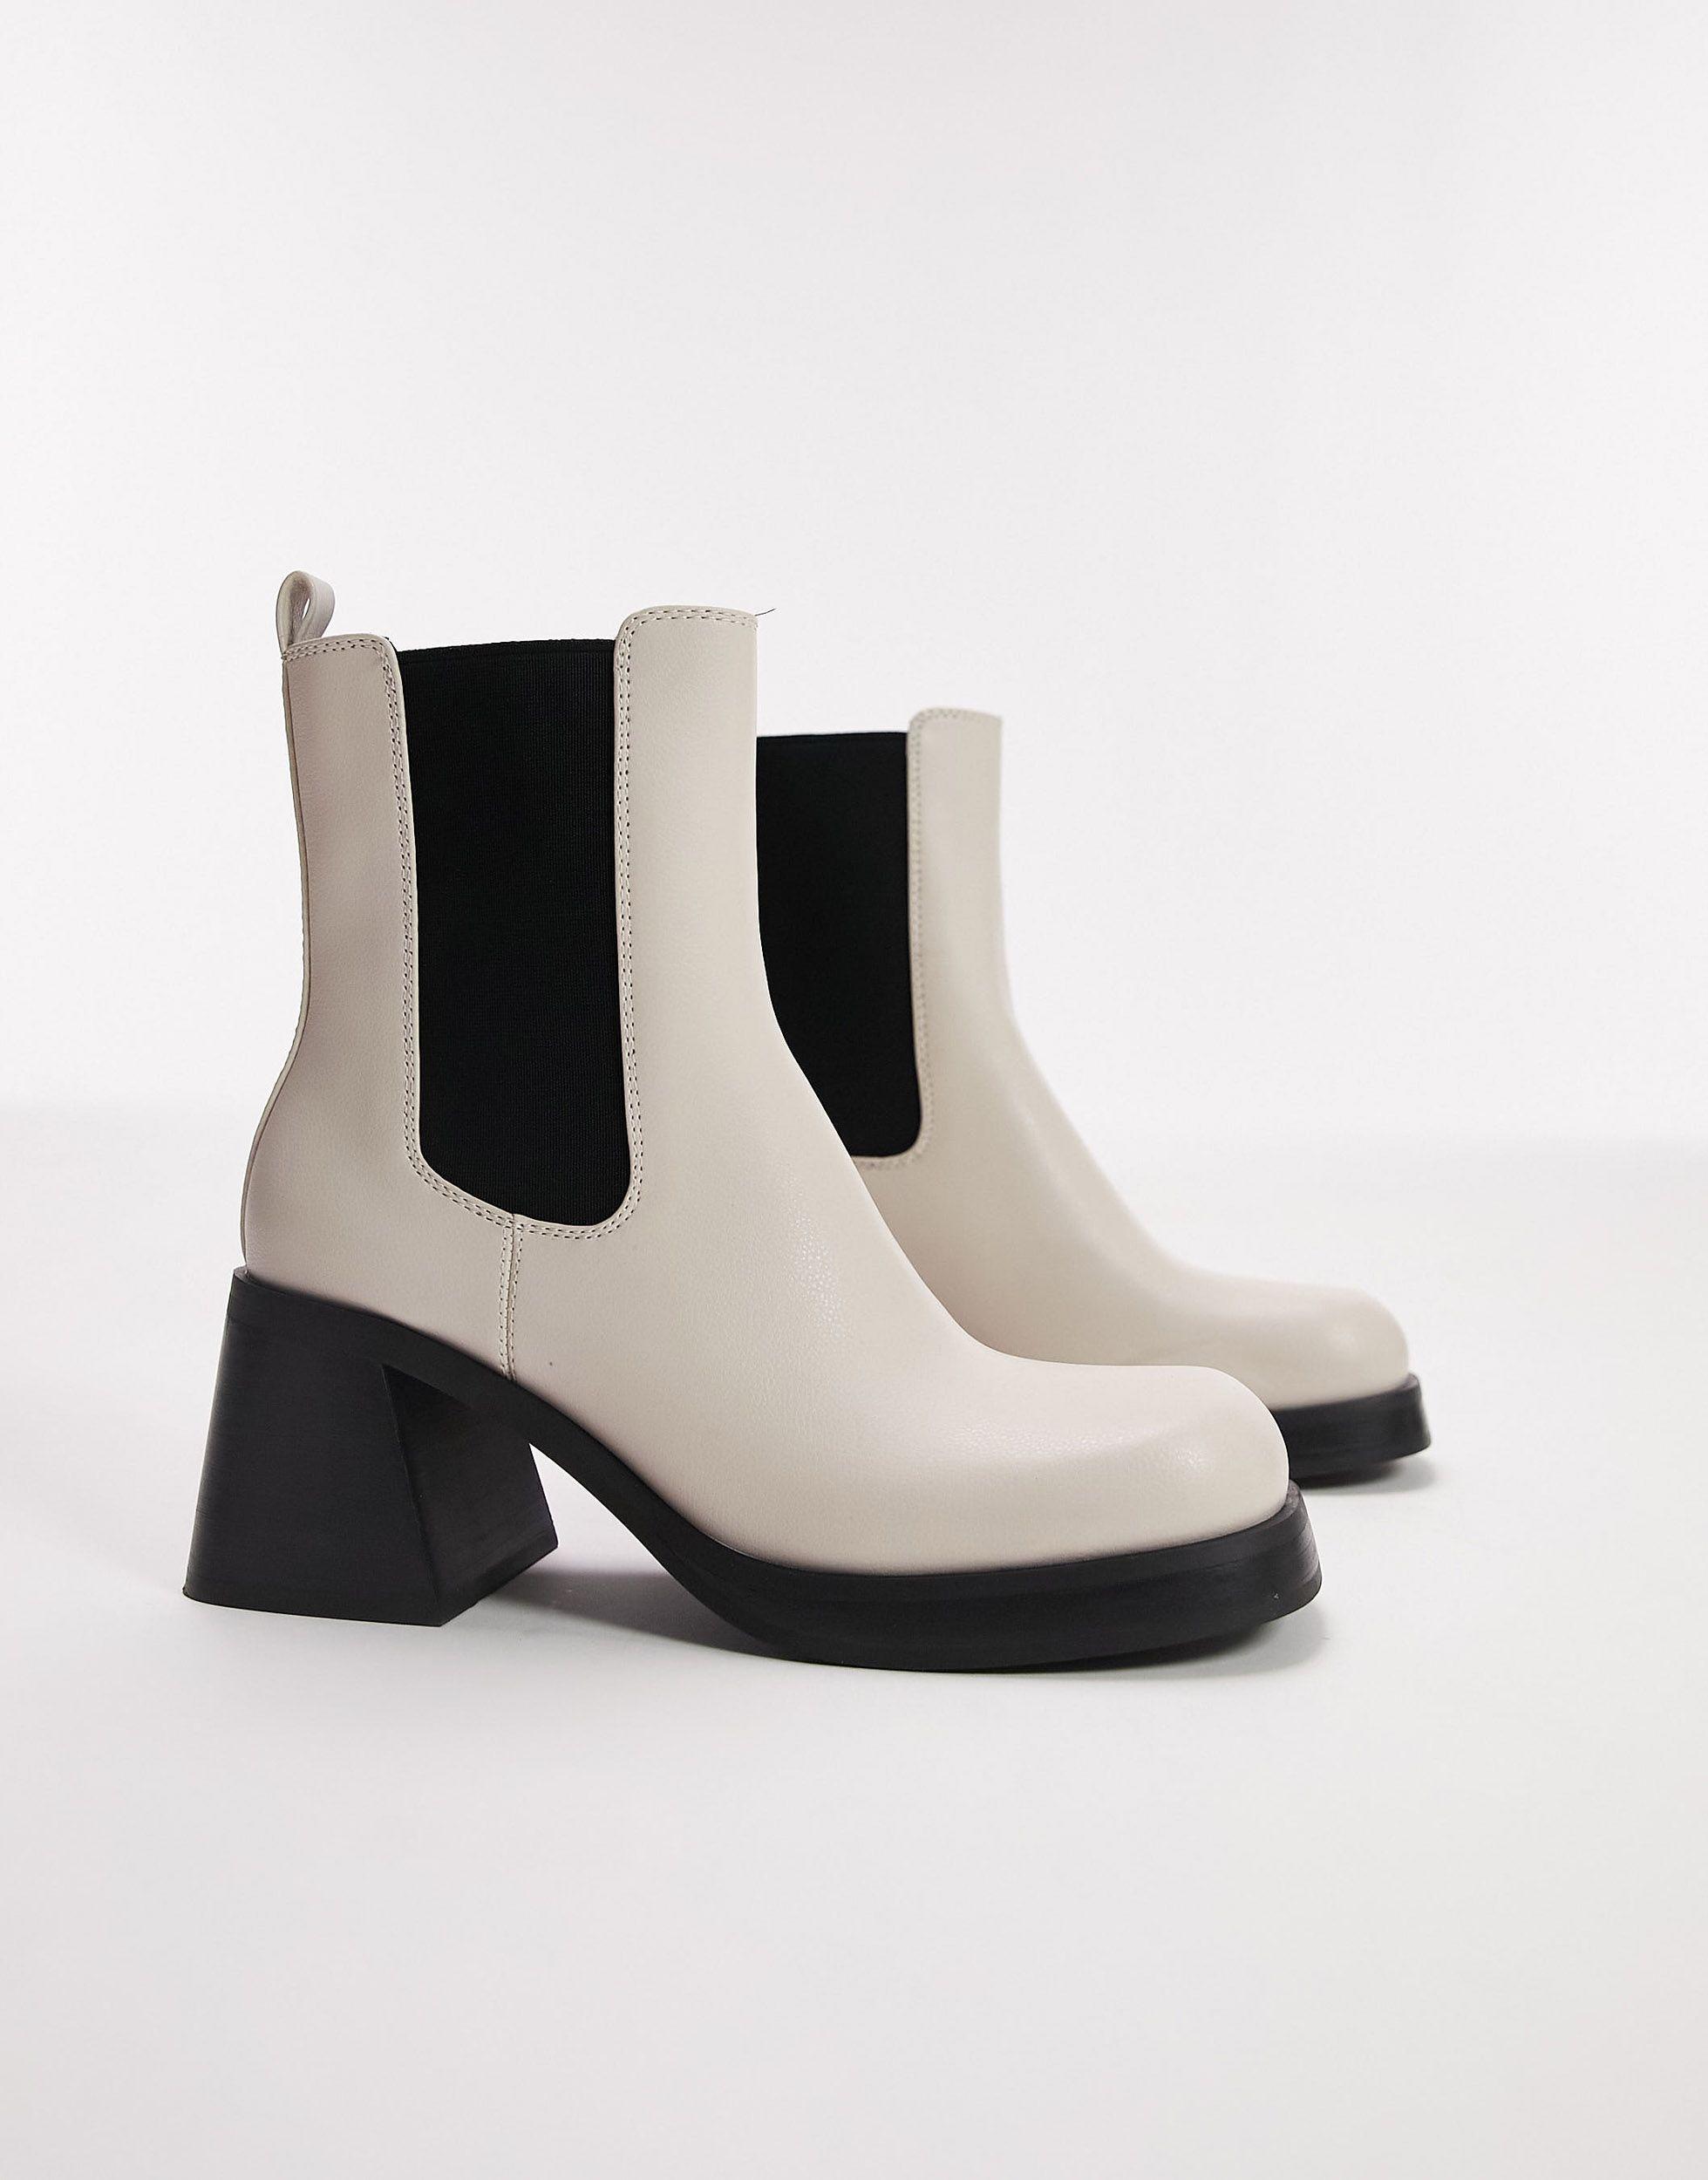 TOPSHOP Bay Square Toe Heeled Chelsea Boot in Black | Lyst